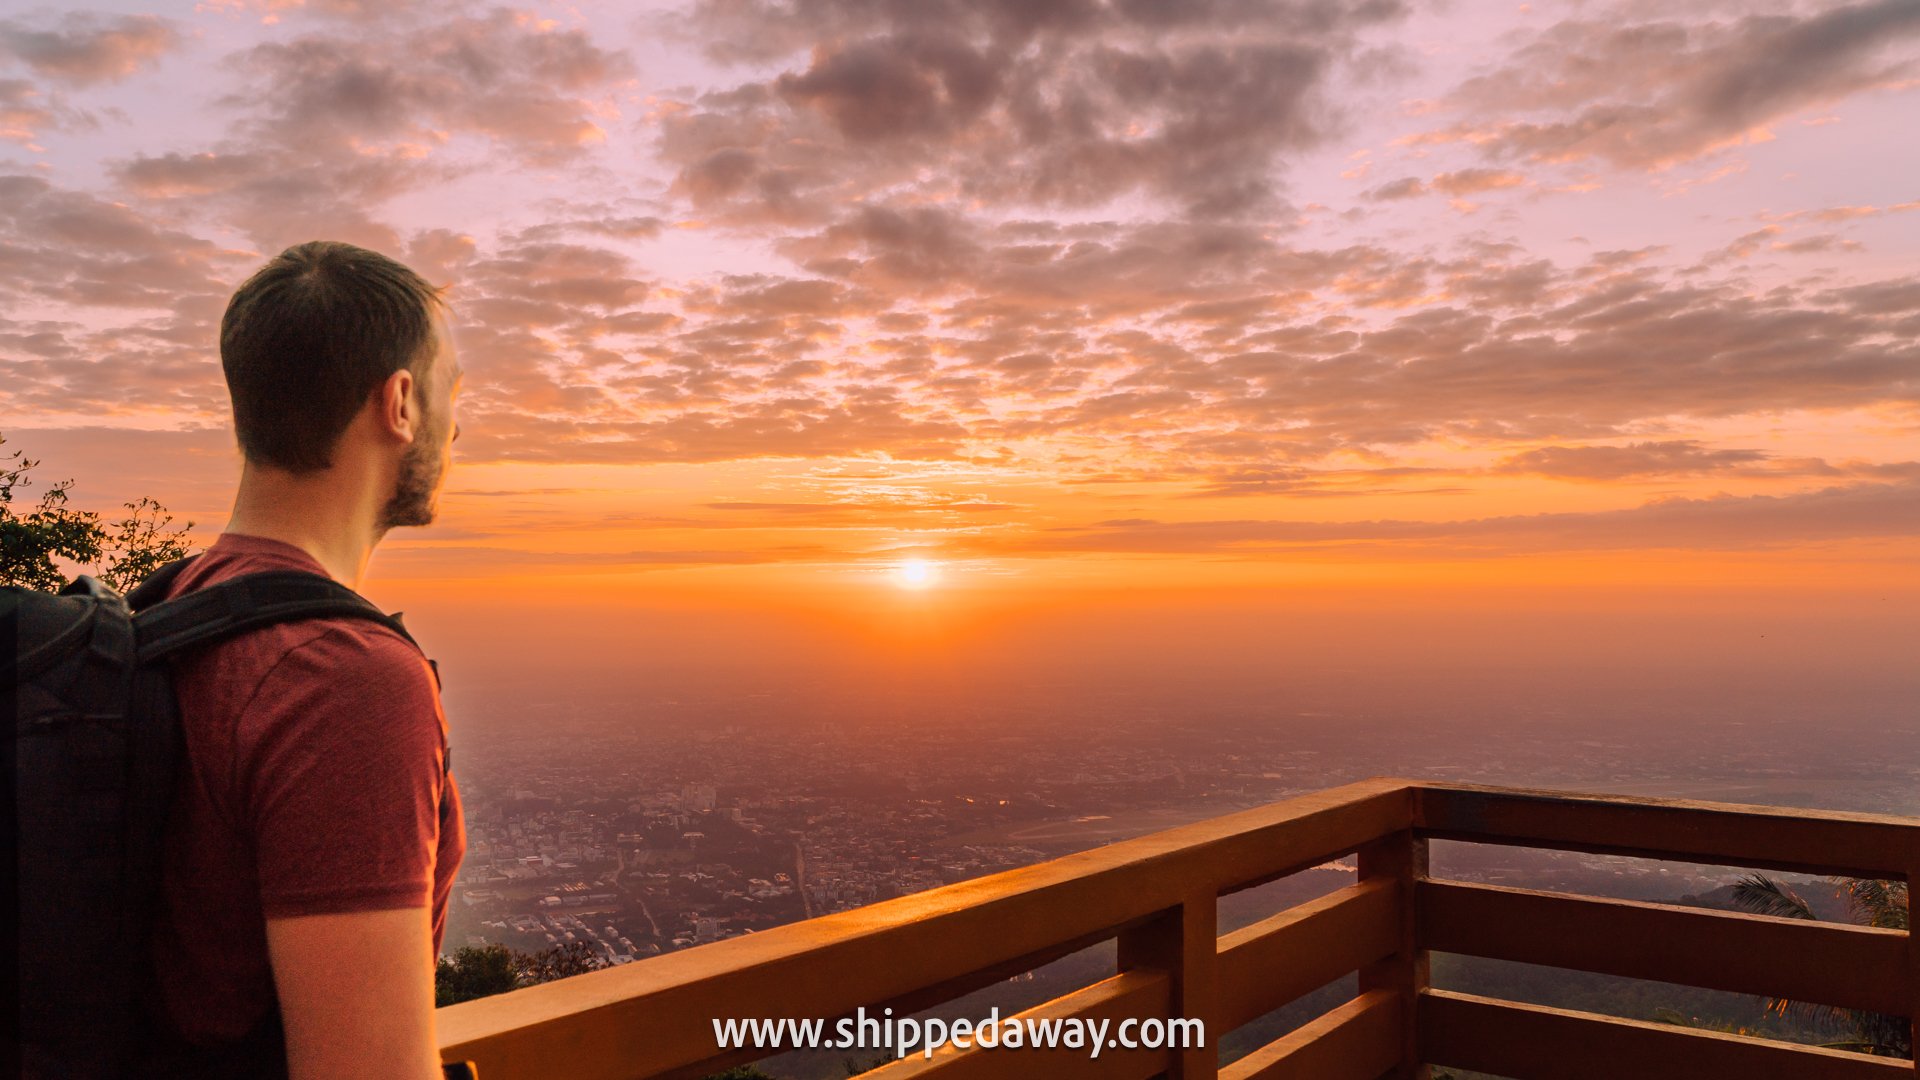 Watching the sunrise over Chiang Mai from viewpoint at Wat Phra That Doi Suthep - Doi Suthep Temple Chiang Mai, Thailand - Travel Guide to Doi Suthep Temple